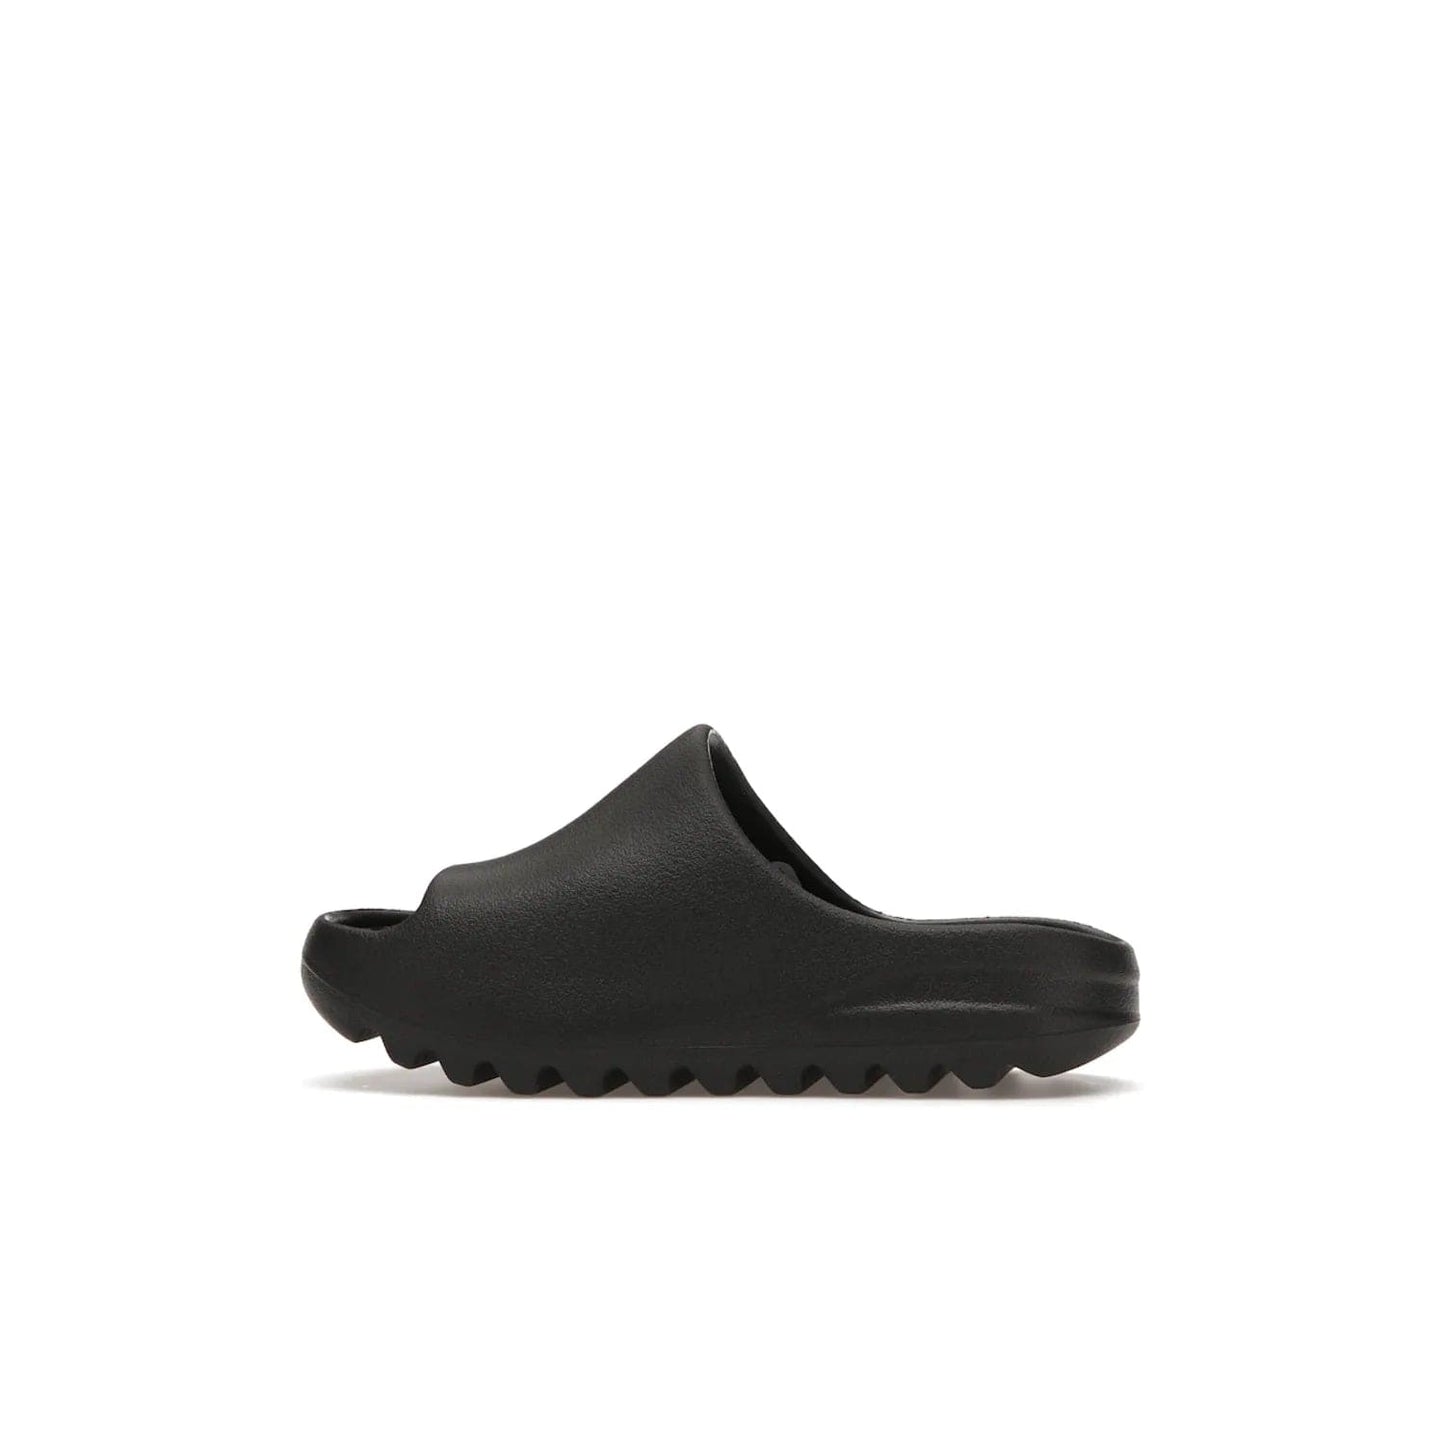 adidas Yeezy Slide Onyx (Kids) - Image 20 - Only at www.BallersClubKickz.com - adidas Yeezy Slide Onyx (Kids): Comfortable foam construction with textured surface and iconic three-stripe logo. Breathable, open-toe design and deep grooves for traction. Released in March 2021 at $50.